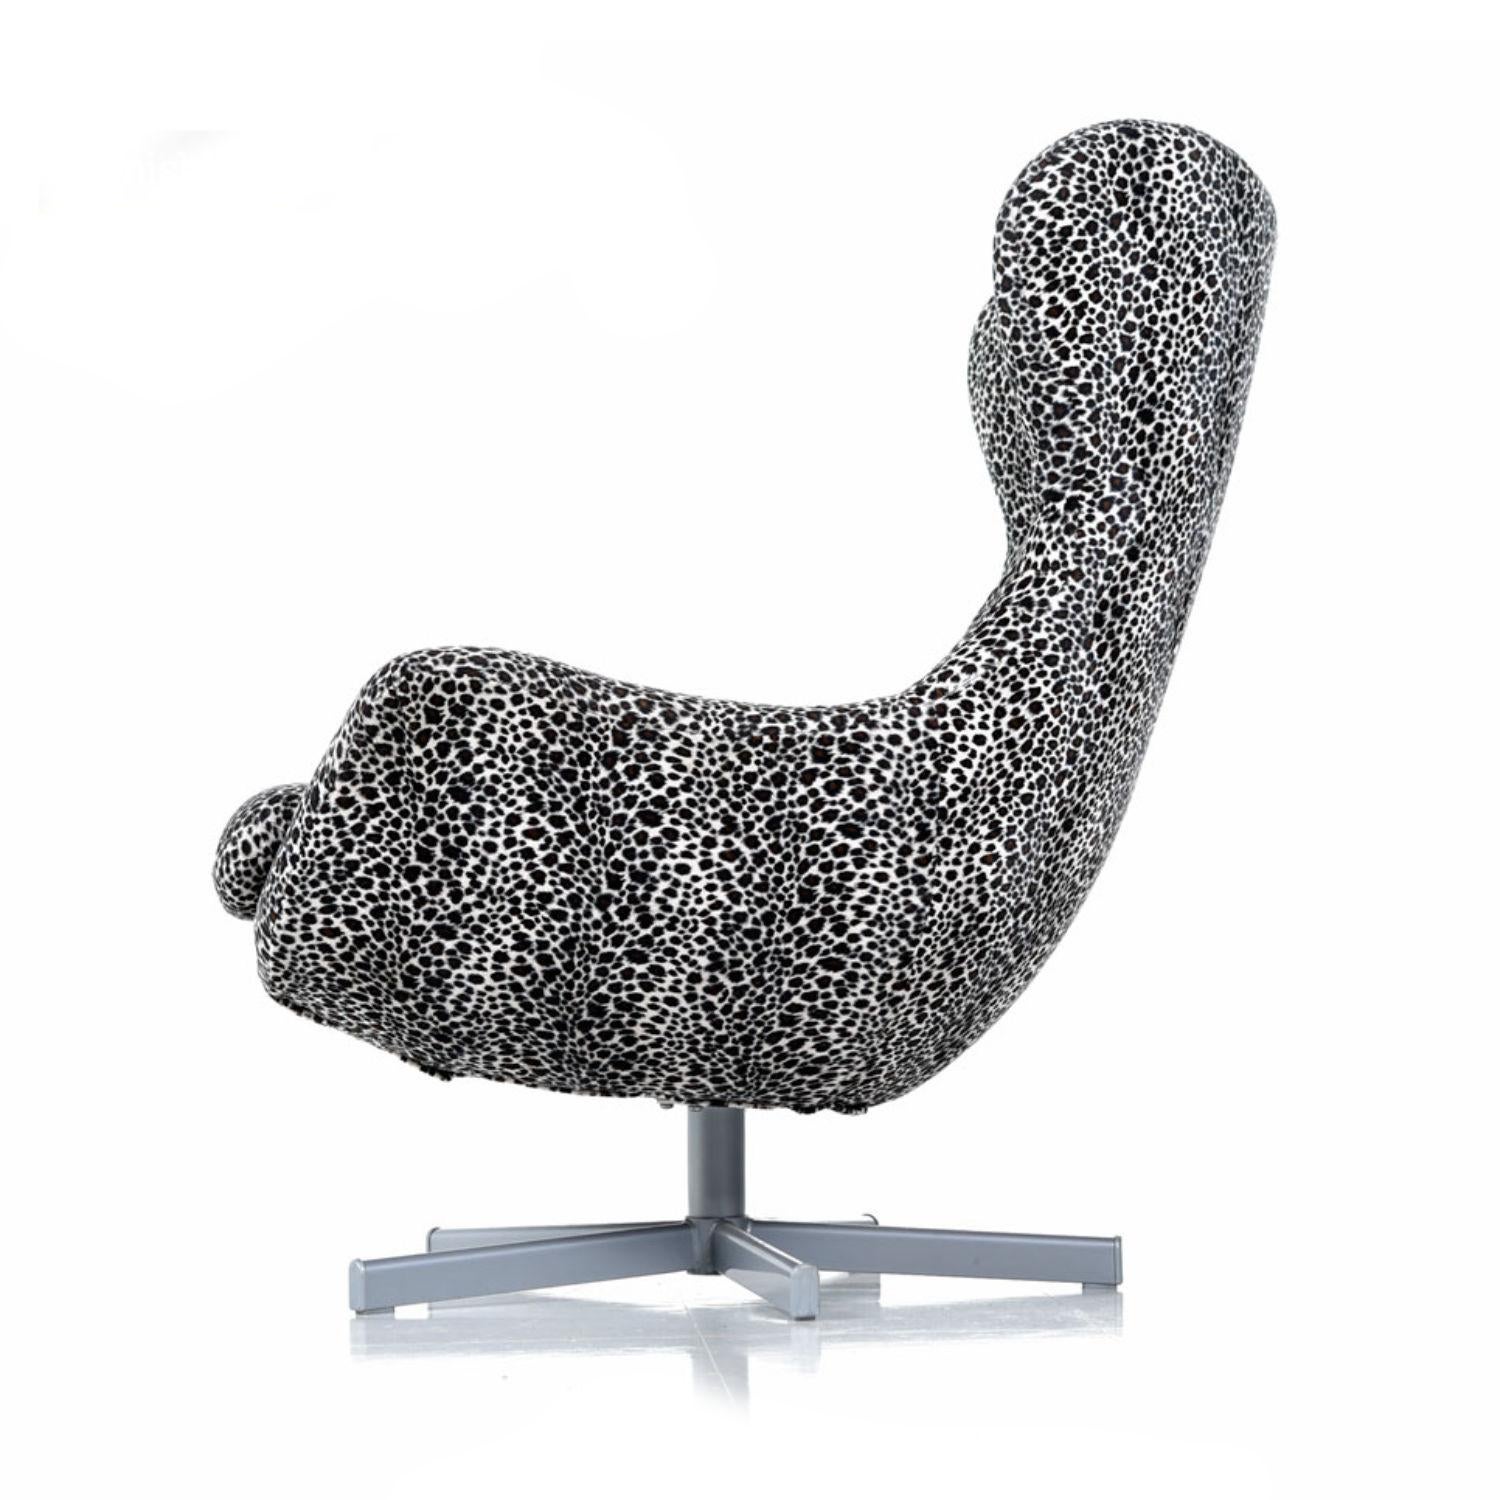 Leather Pair of Vintage Fuzzy Leopard Arne Jacobsen Egg Chair Style Swivel Chairs For Sale